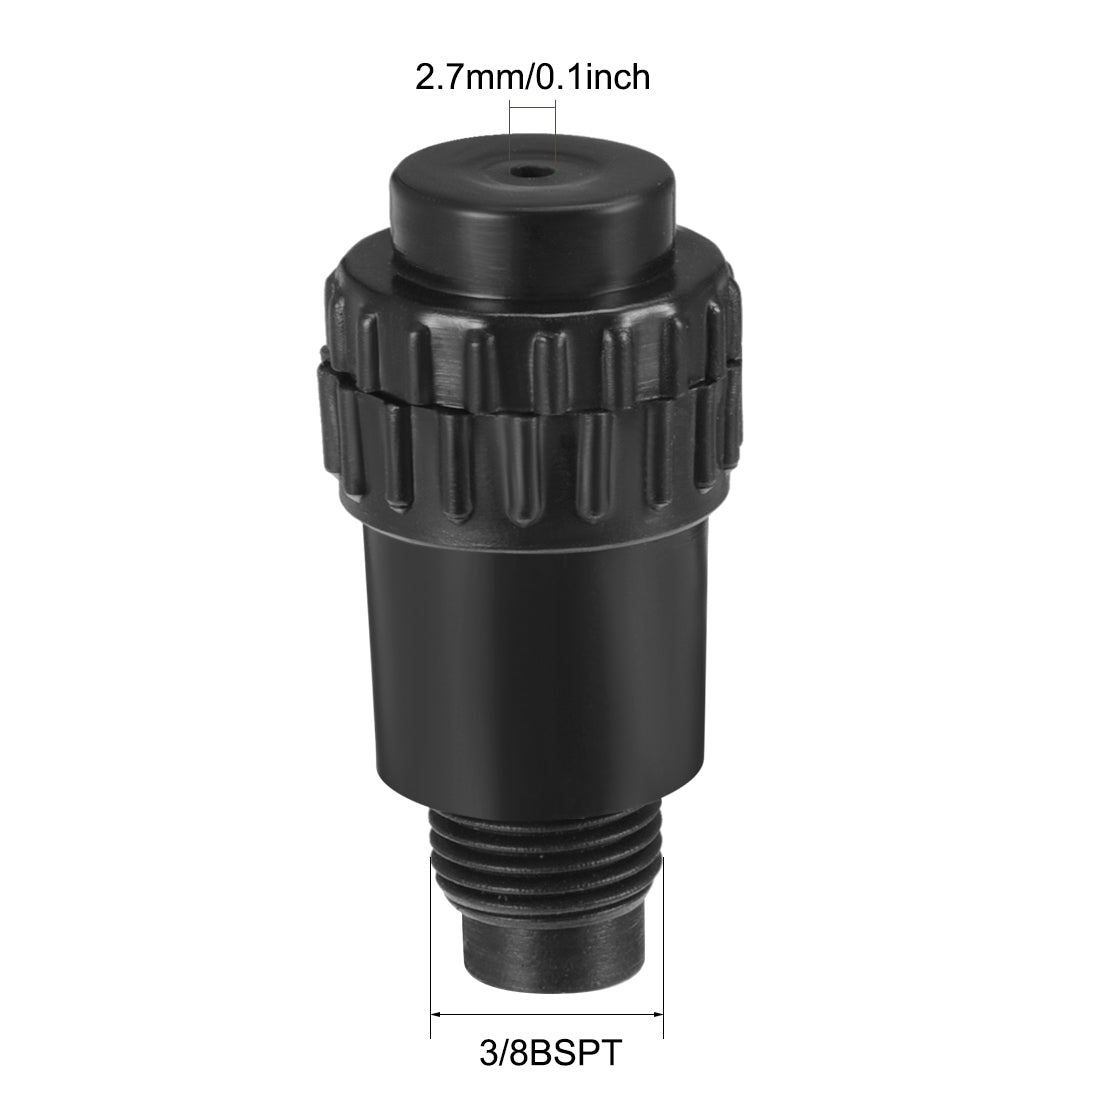 uxcell Uxcell 3/8BSPT Thread Oil Plug Connector Air Compressor Spare Fittings Black 2 pcs